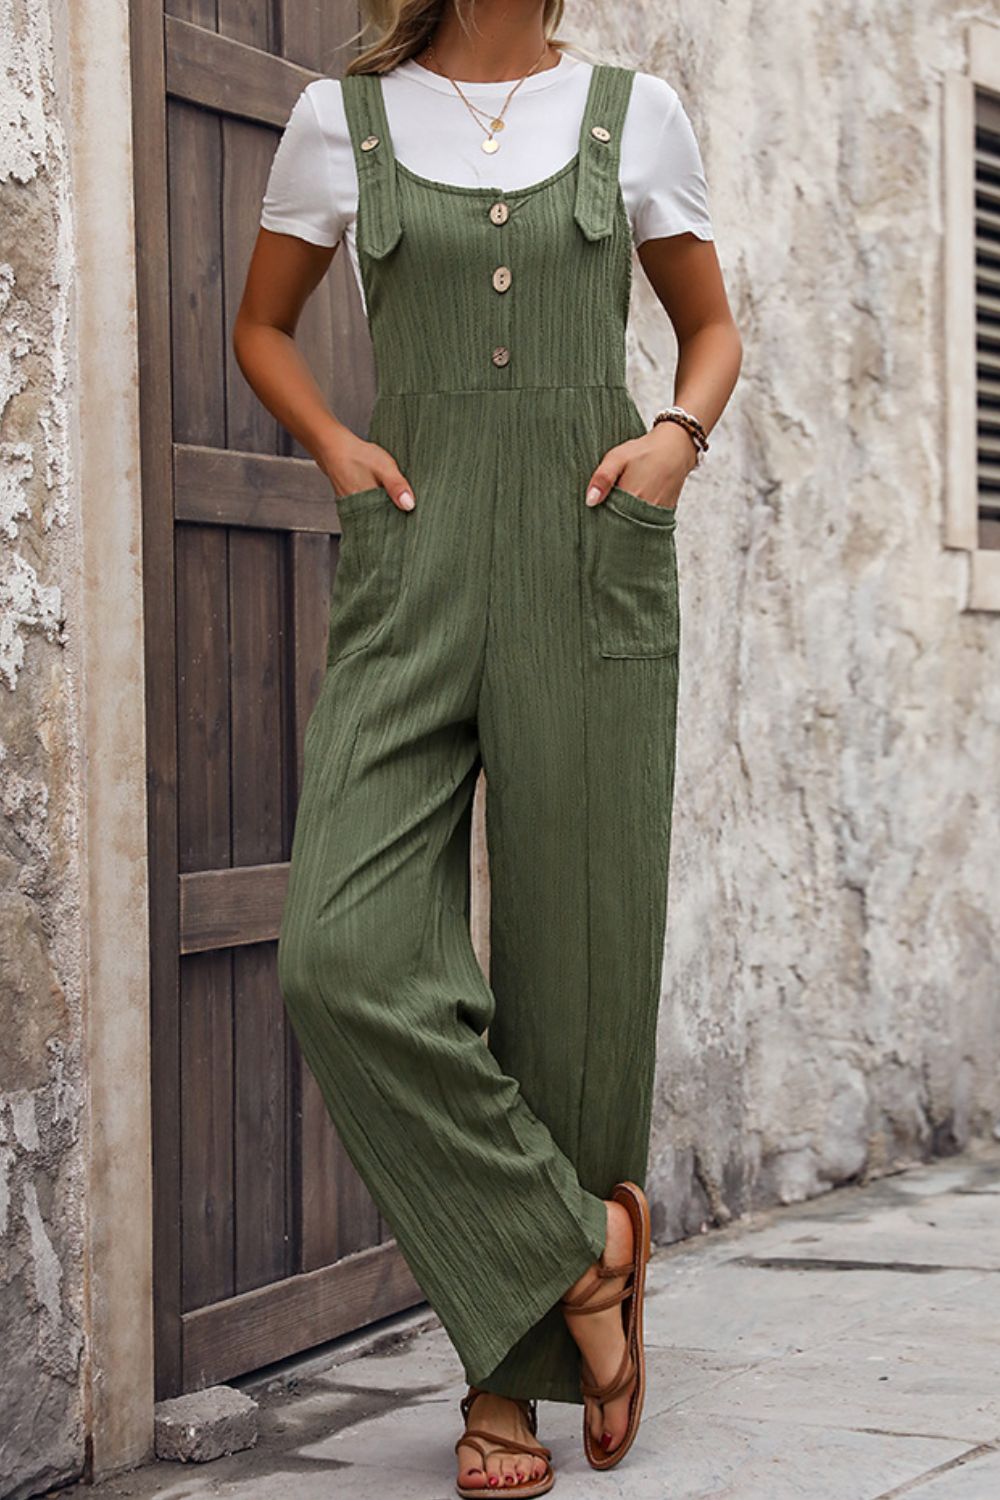 Textured Pocketed Wide Strap Overalls Bottom wear